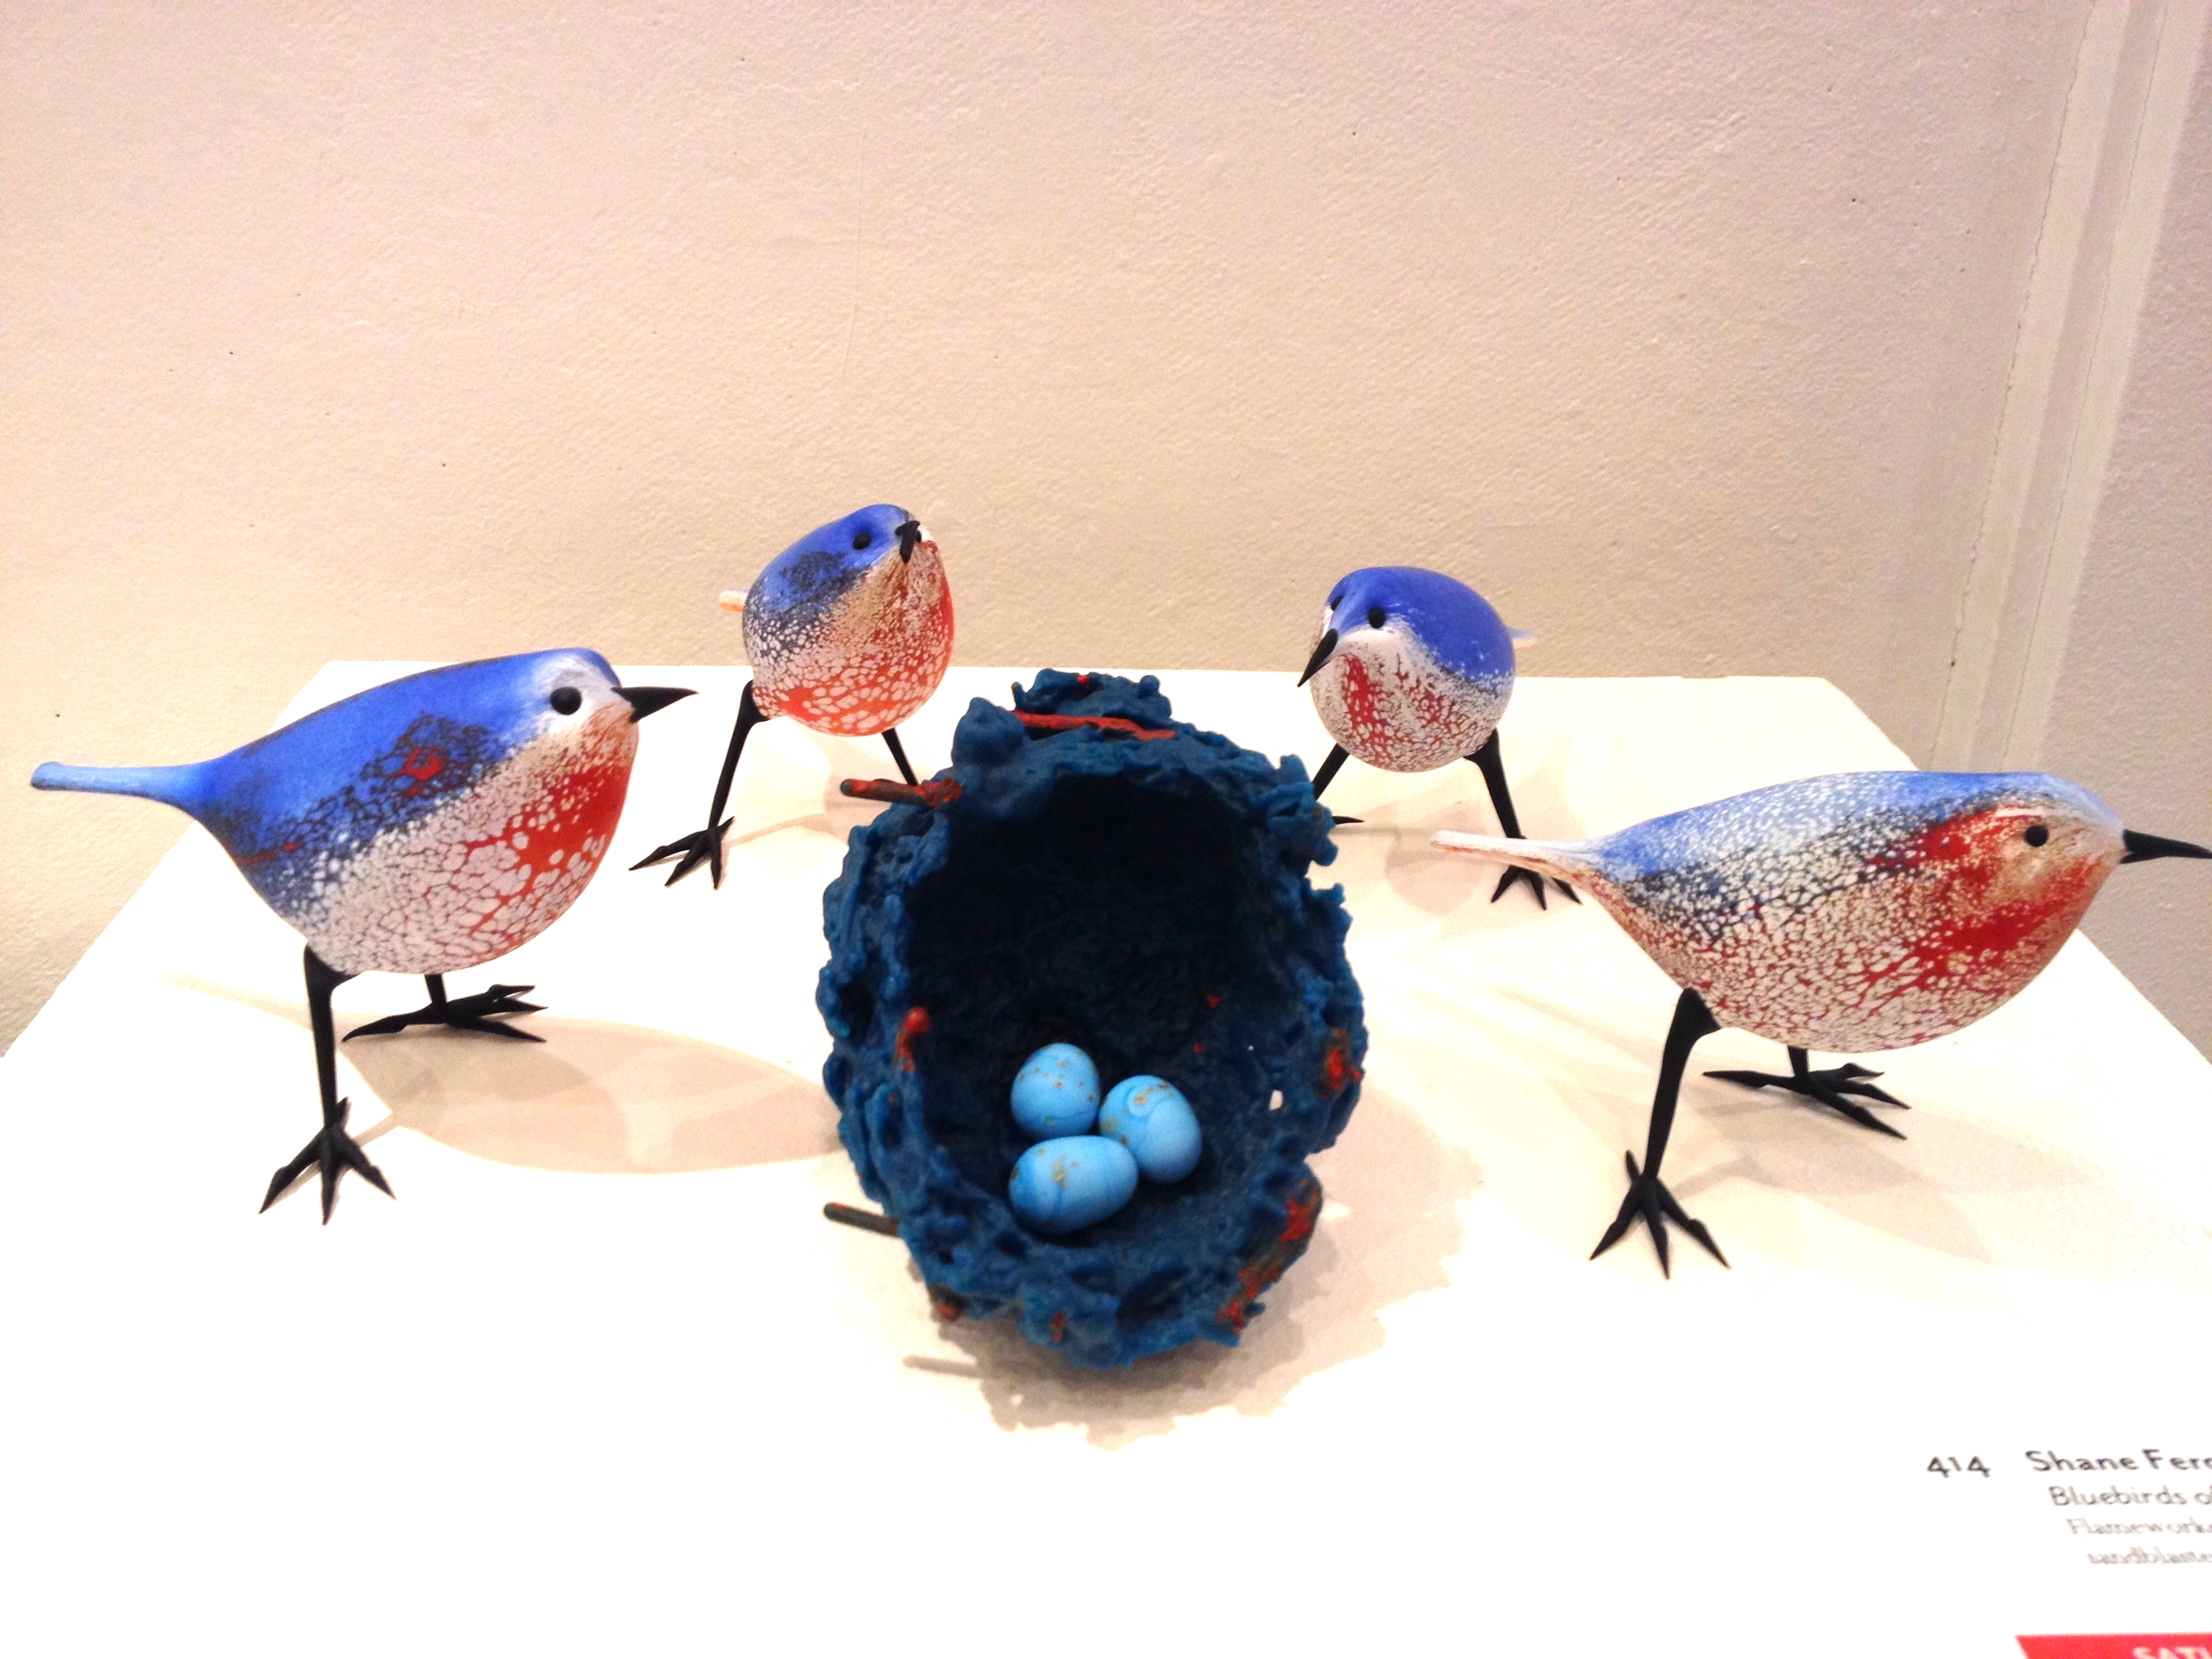   Shane Fero     Bluebirds of Penland Meadow    Flameworked glass, cast glass, sandblasted and acid etched&nbsp; 